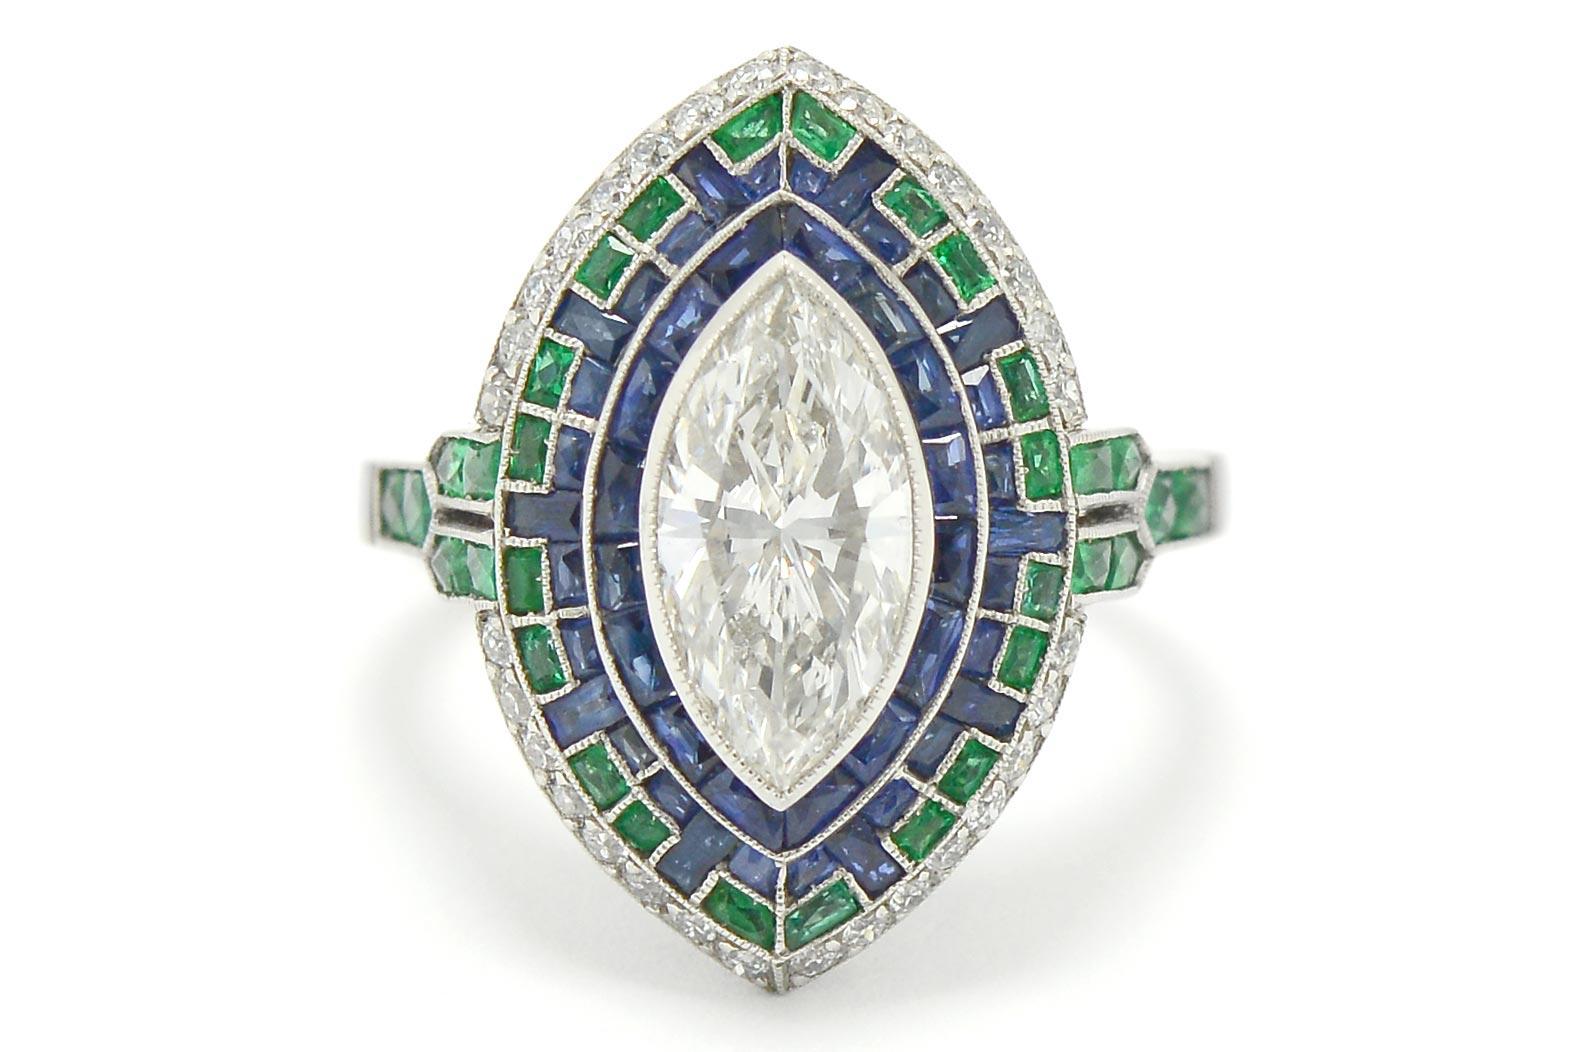 Marquis Diamond Art Deco Style Engagement Ring Cocktail Sapphire Emerald Mosaic